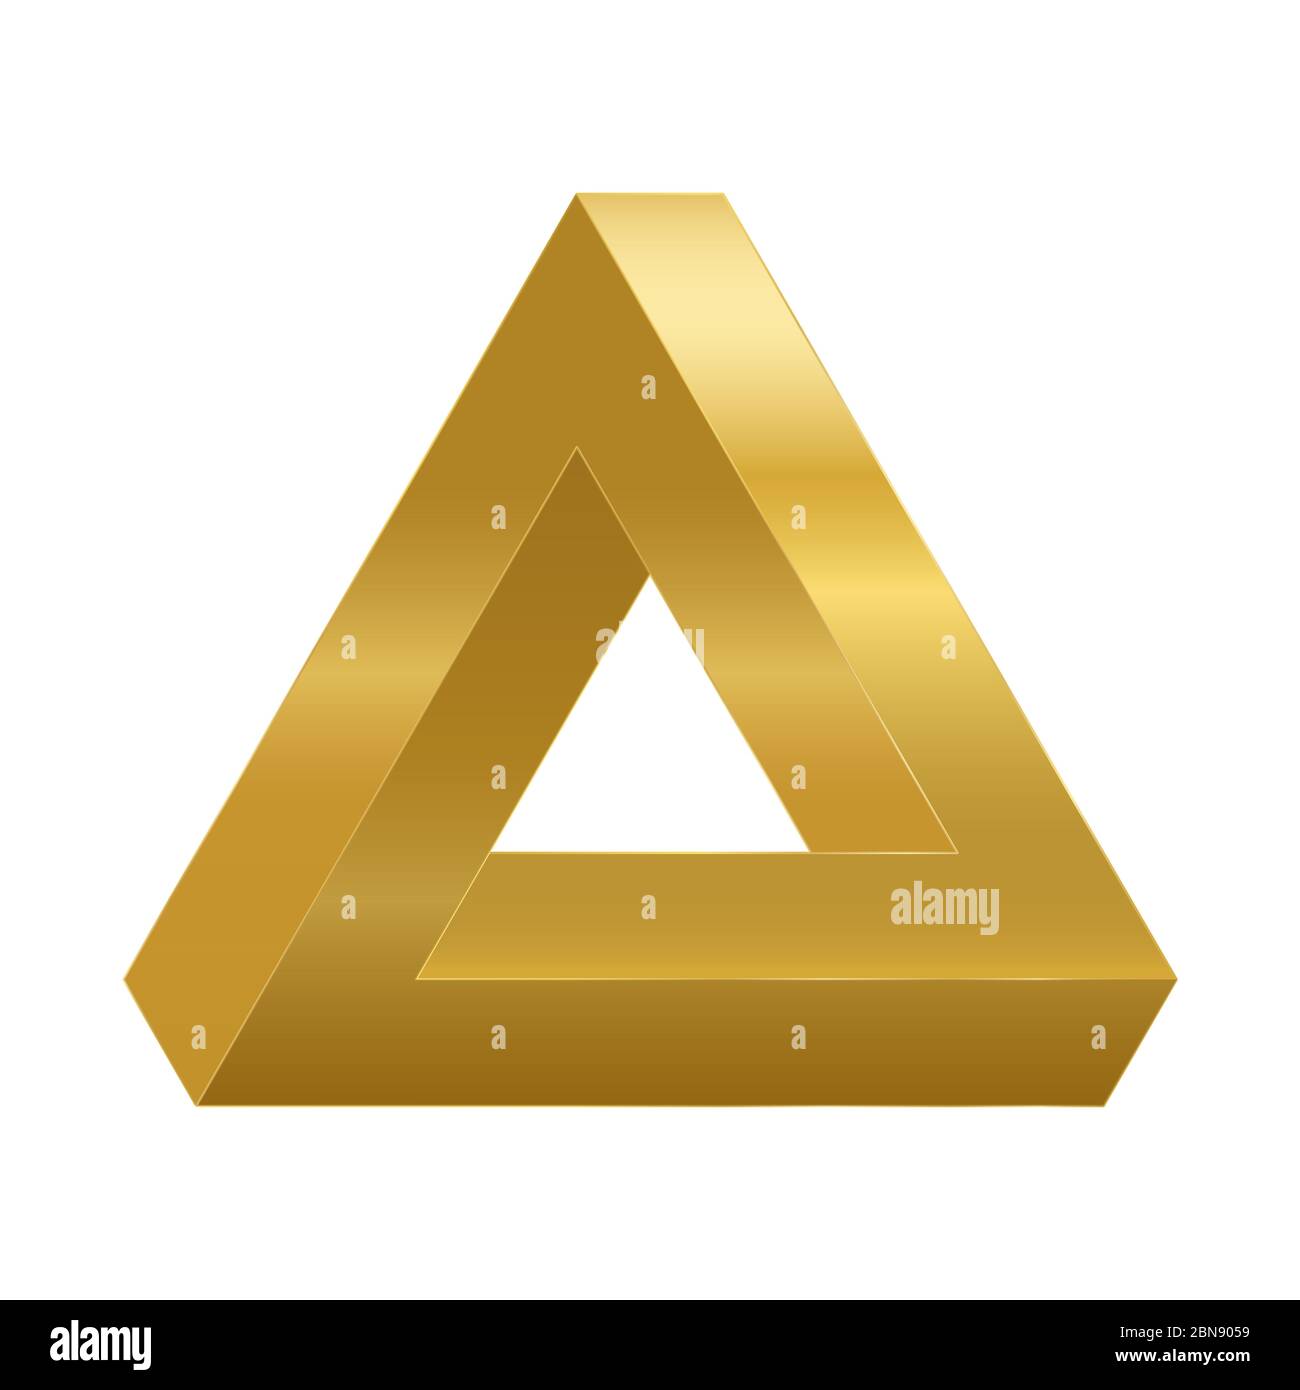 Penrose triangle, optical illusion, golden impossible object. Penrose tribar appears to be a solid object, made of three straight bars. Stock Photo